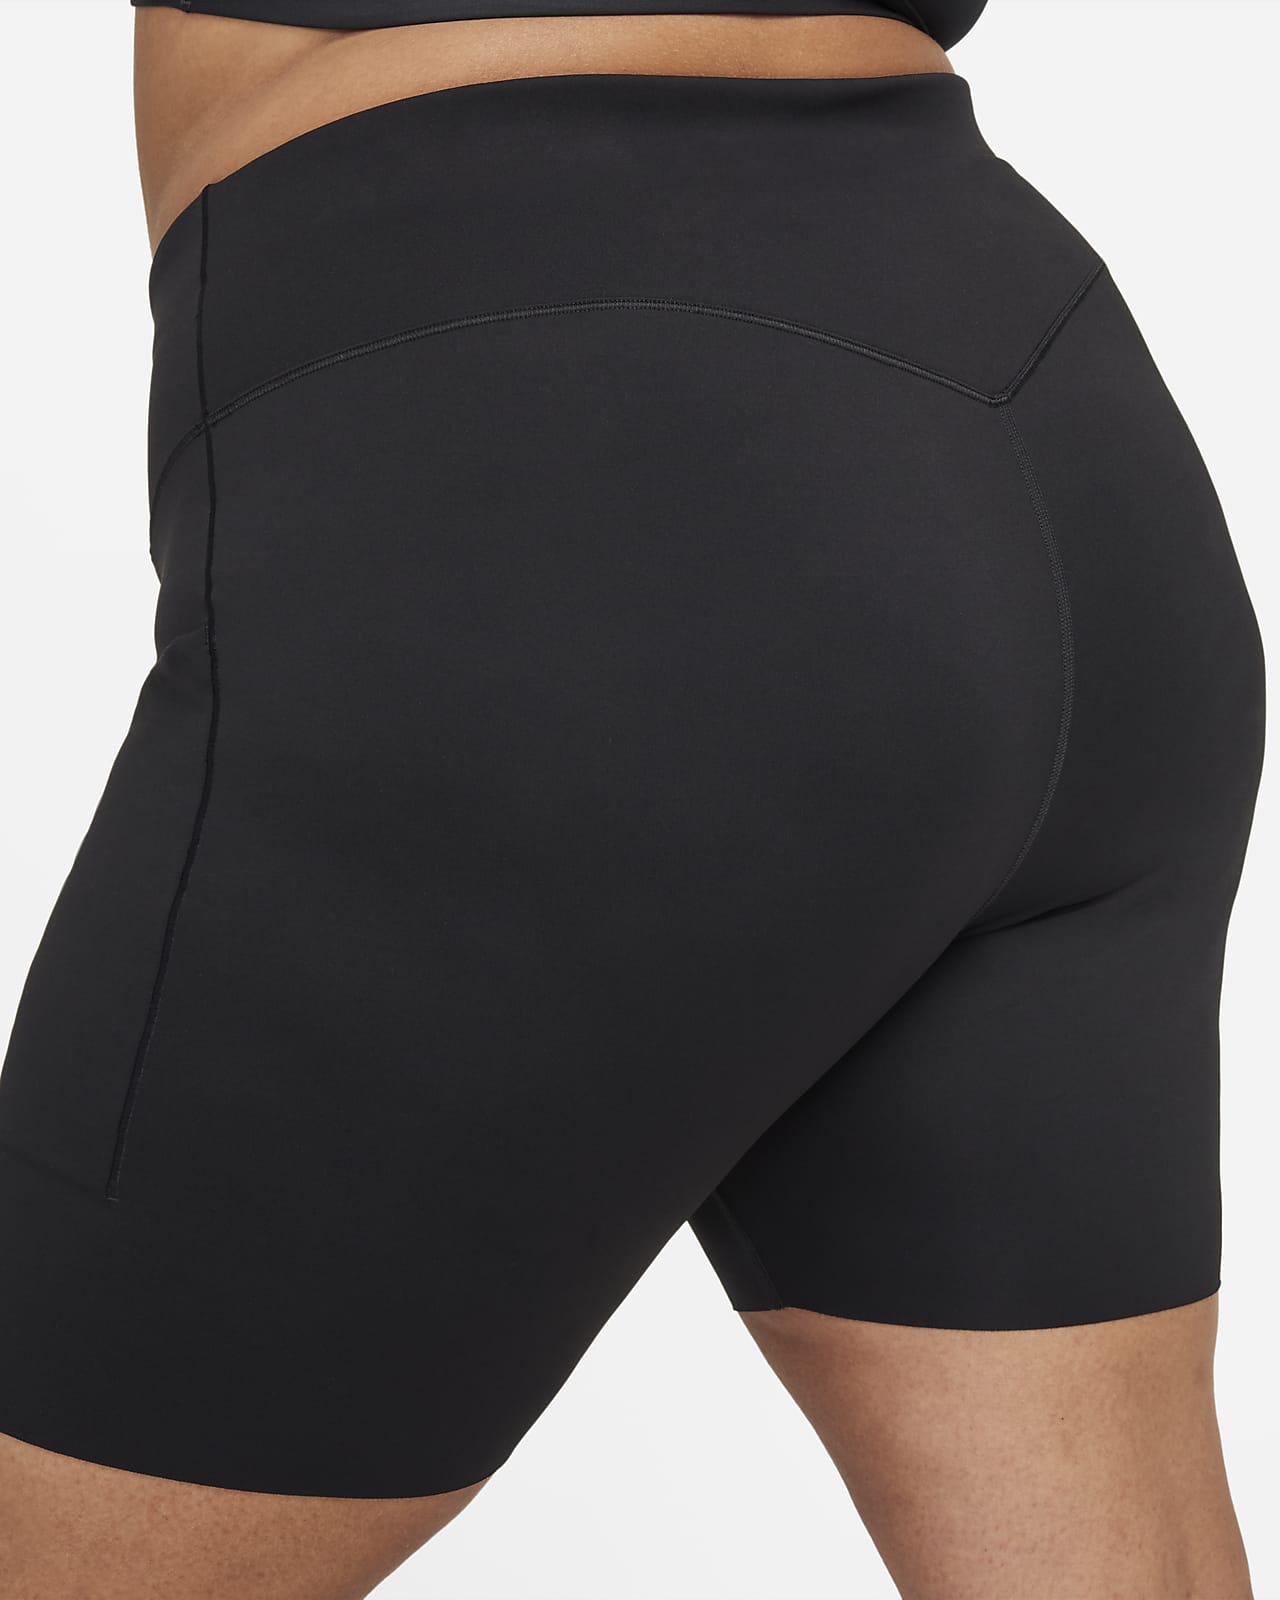 Black Biker Shorts, High Waisted, Squat Proof, 5 Star Rated